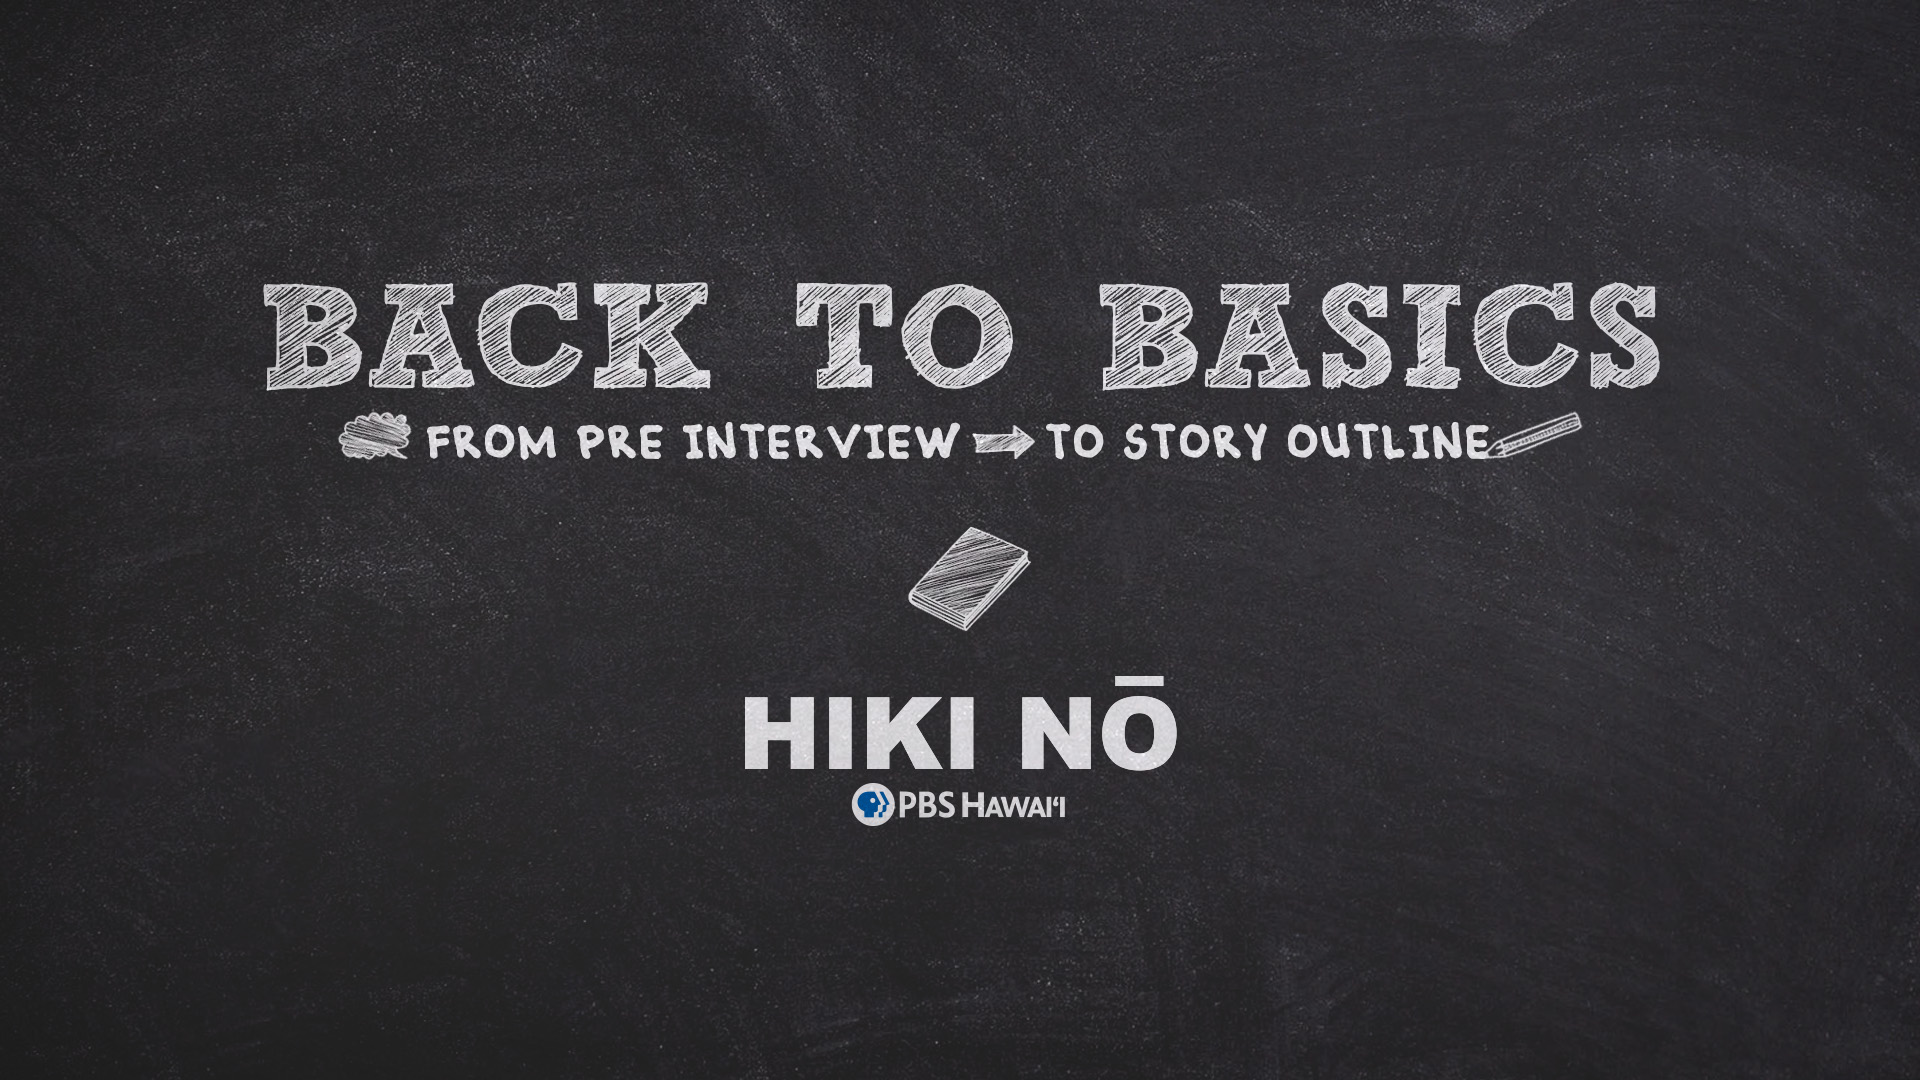 HIKI NŌ BACK TO BASICS: FROM PRE INTERVIEW TO STORY OUTLINE